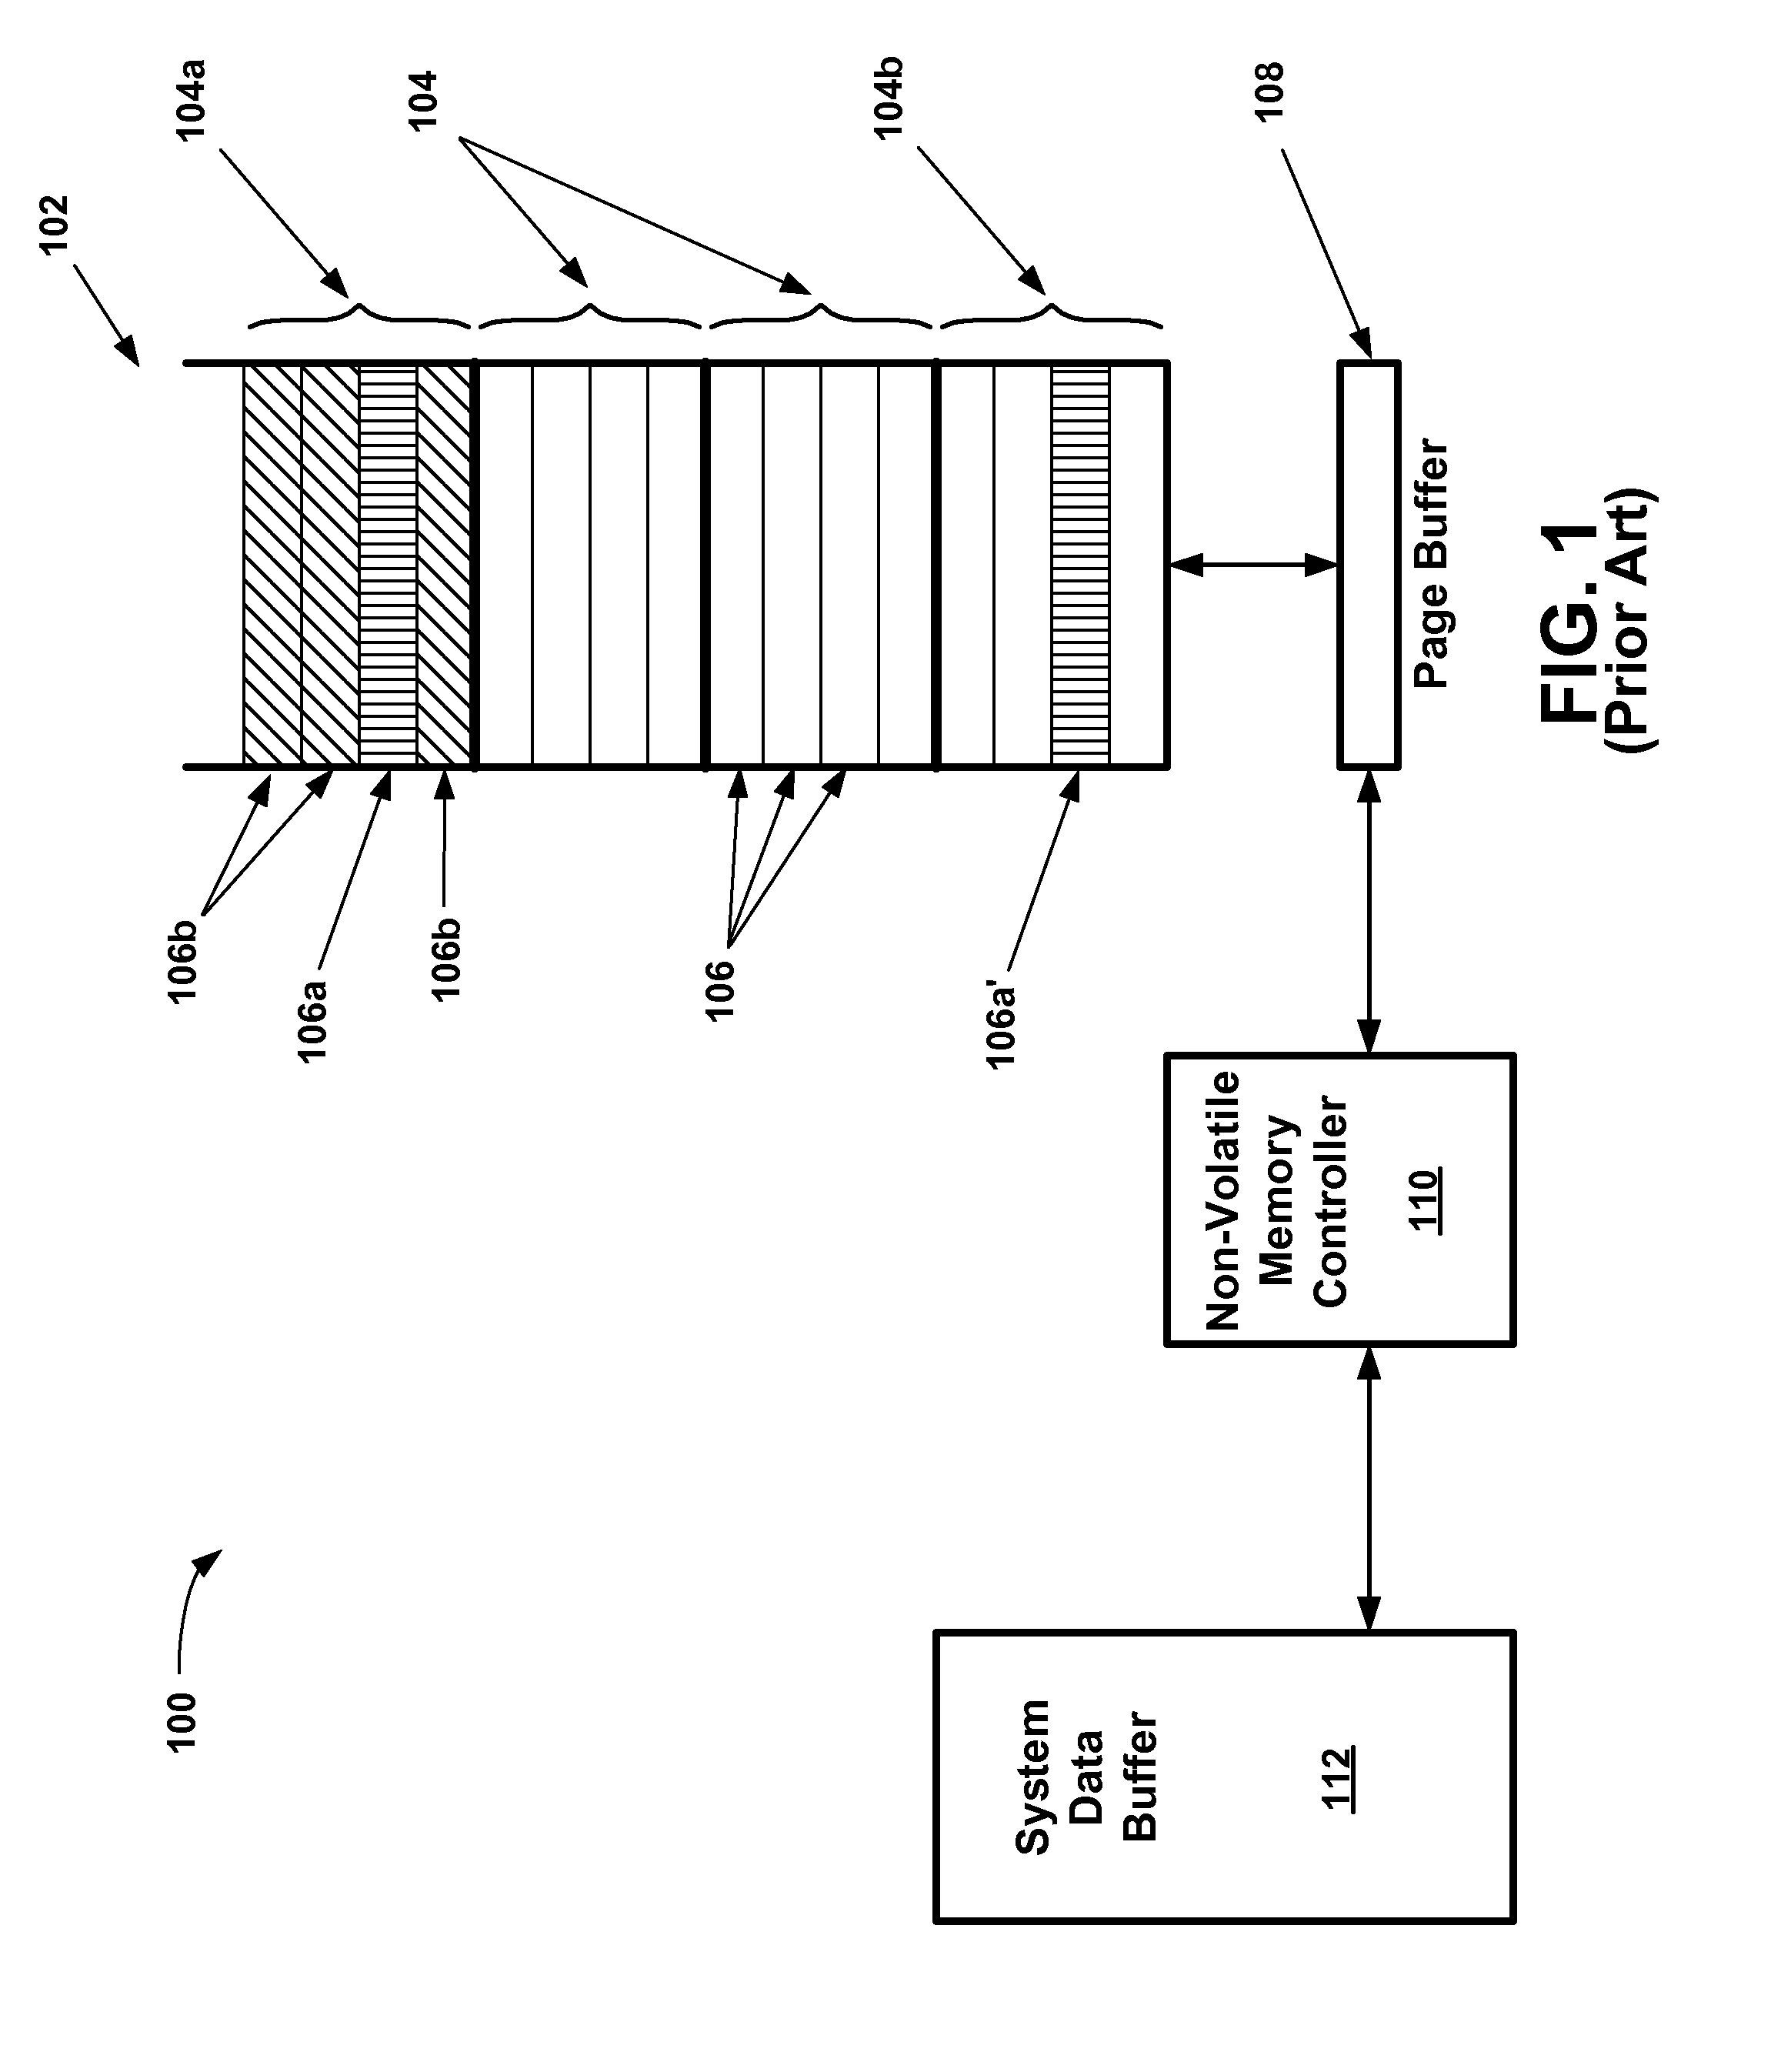 System and method for providing copyback data integrity in a non-volatile memory system